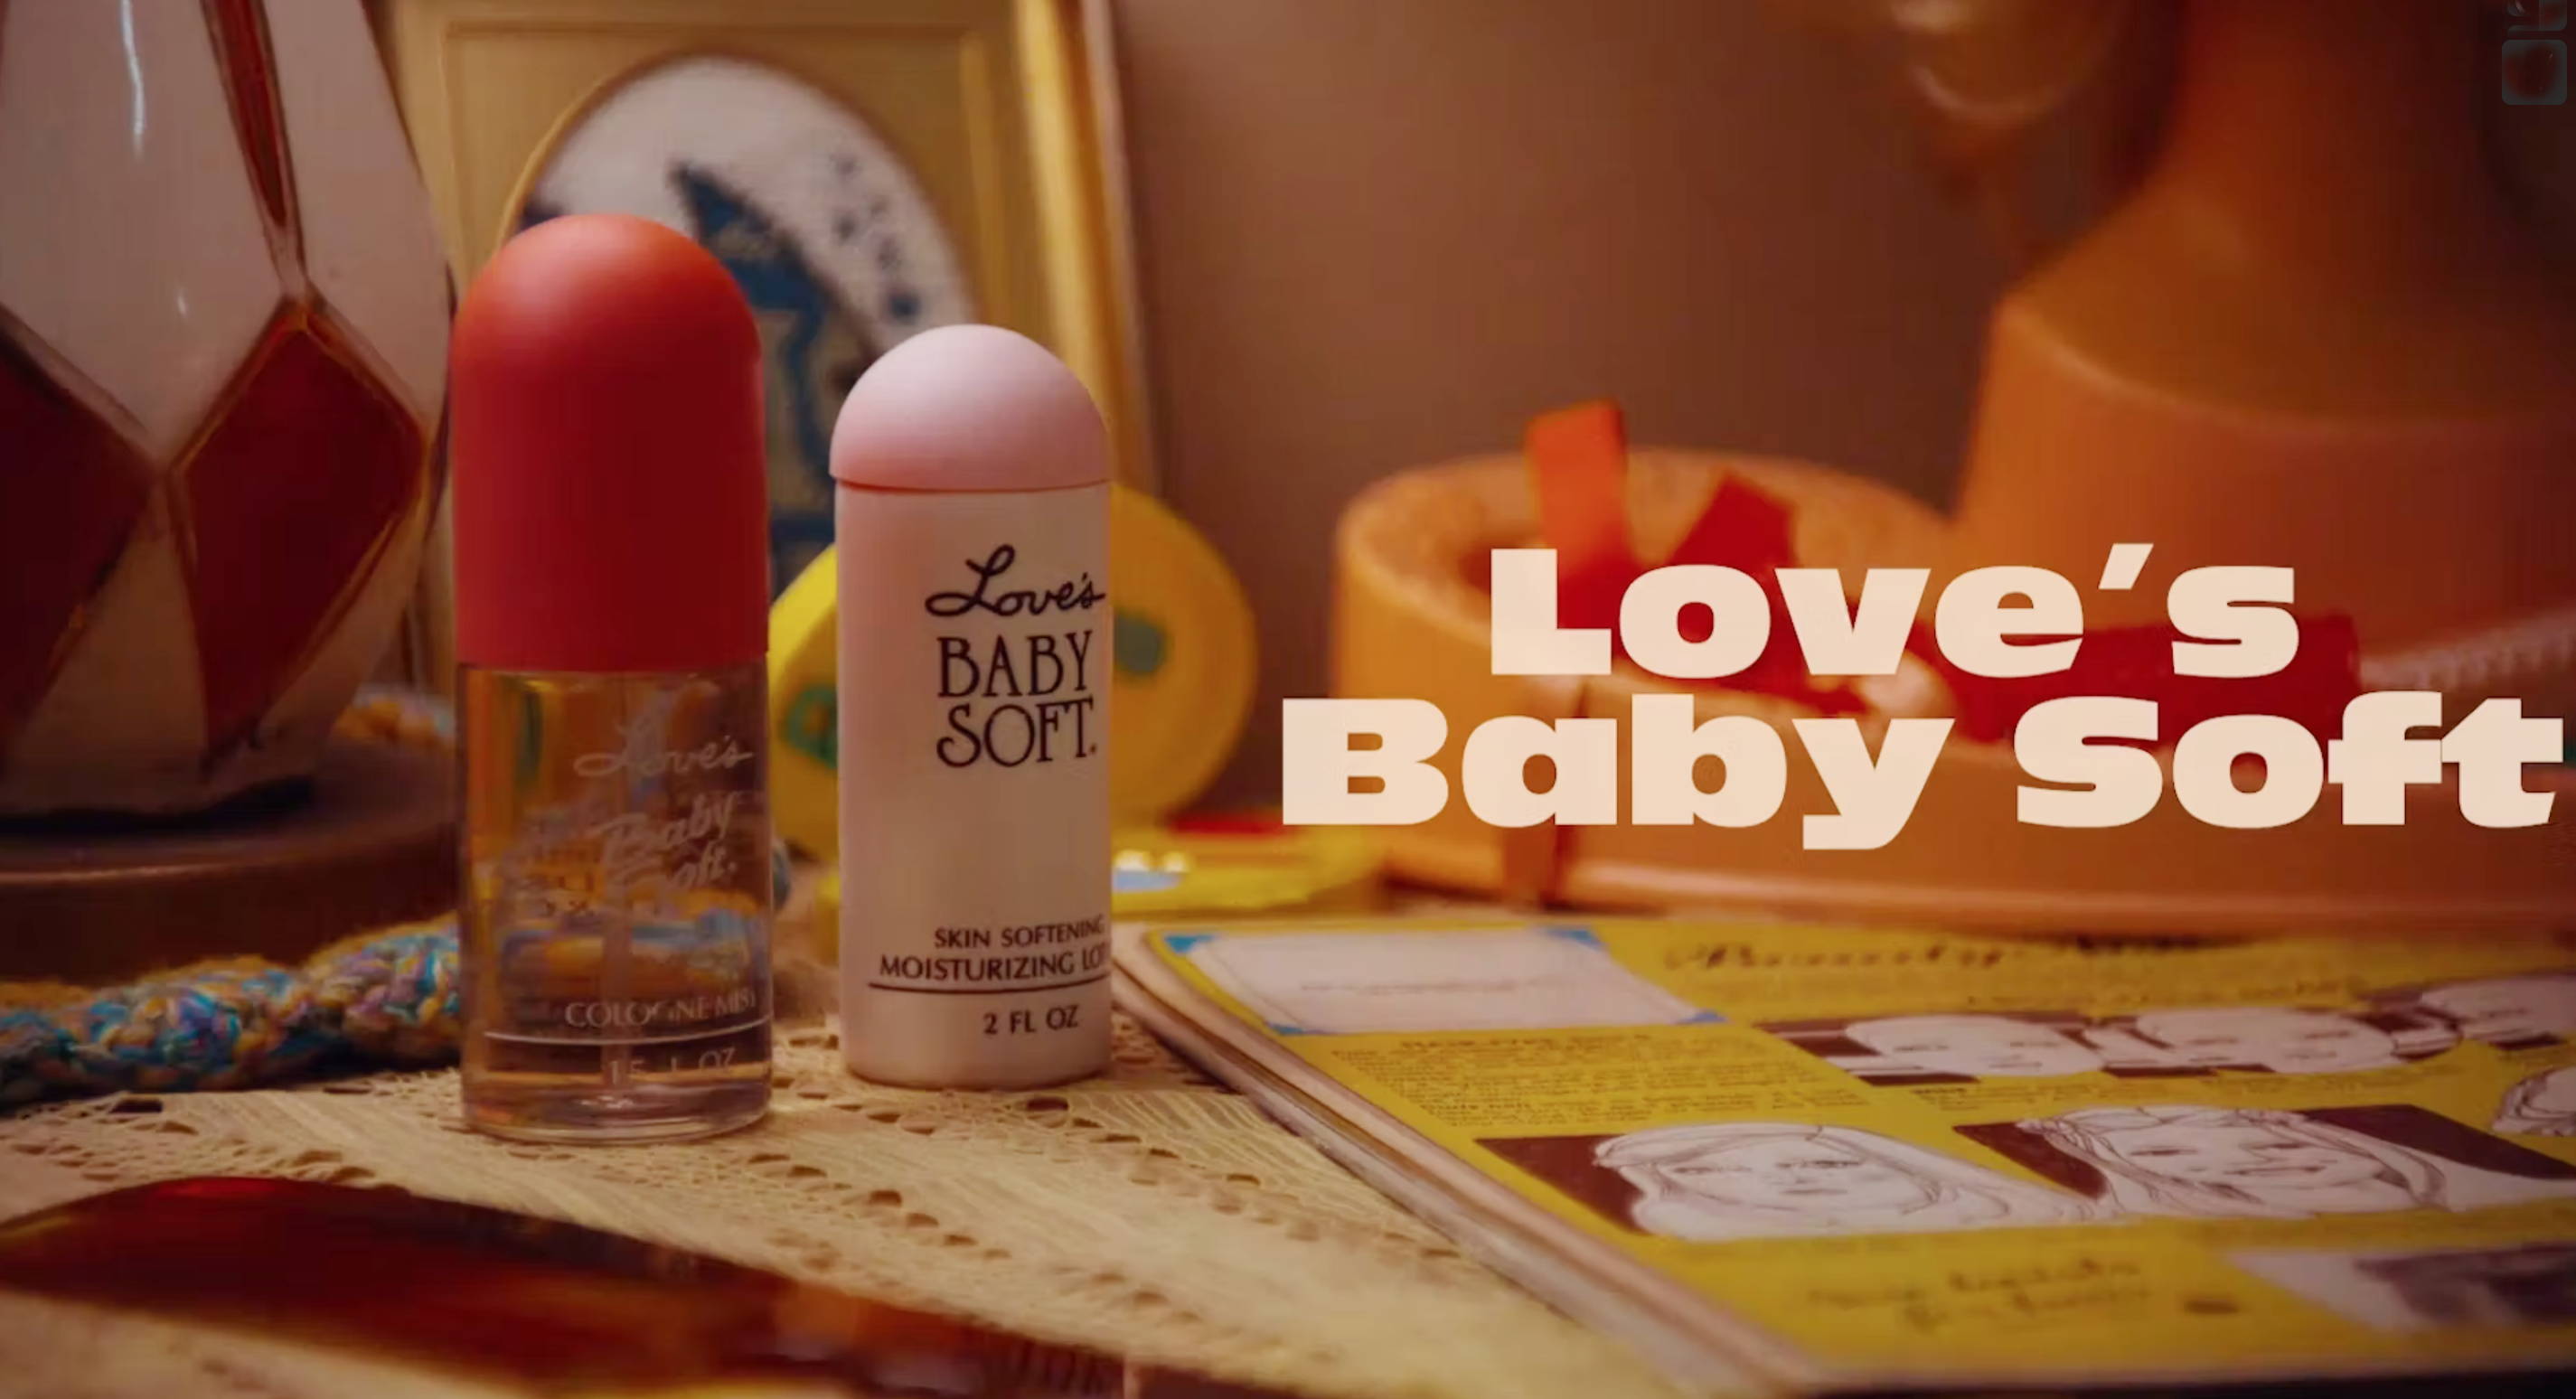 Frist seen of the short movie Love's Baby Soft with 2 samples of vintage Love's Baby Soft bottles on a night stand.